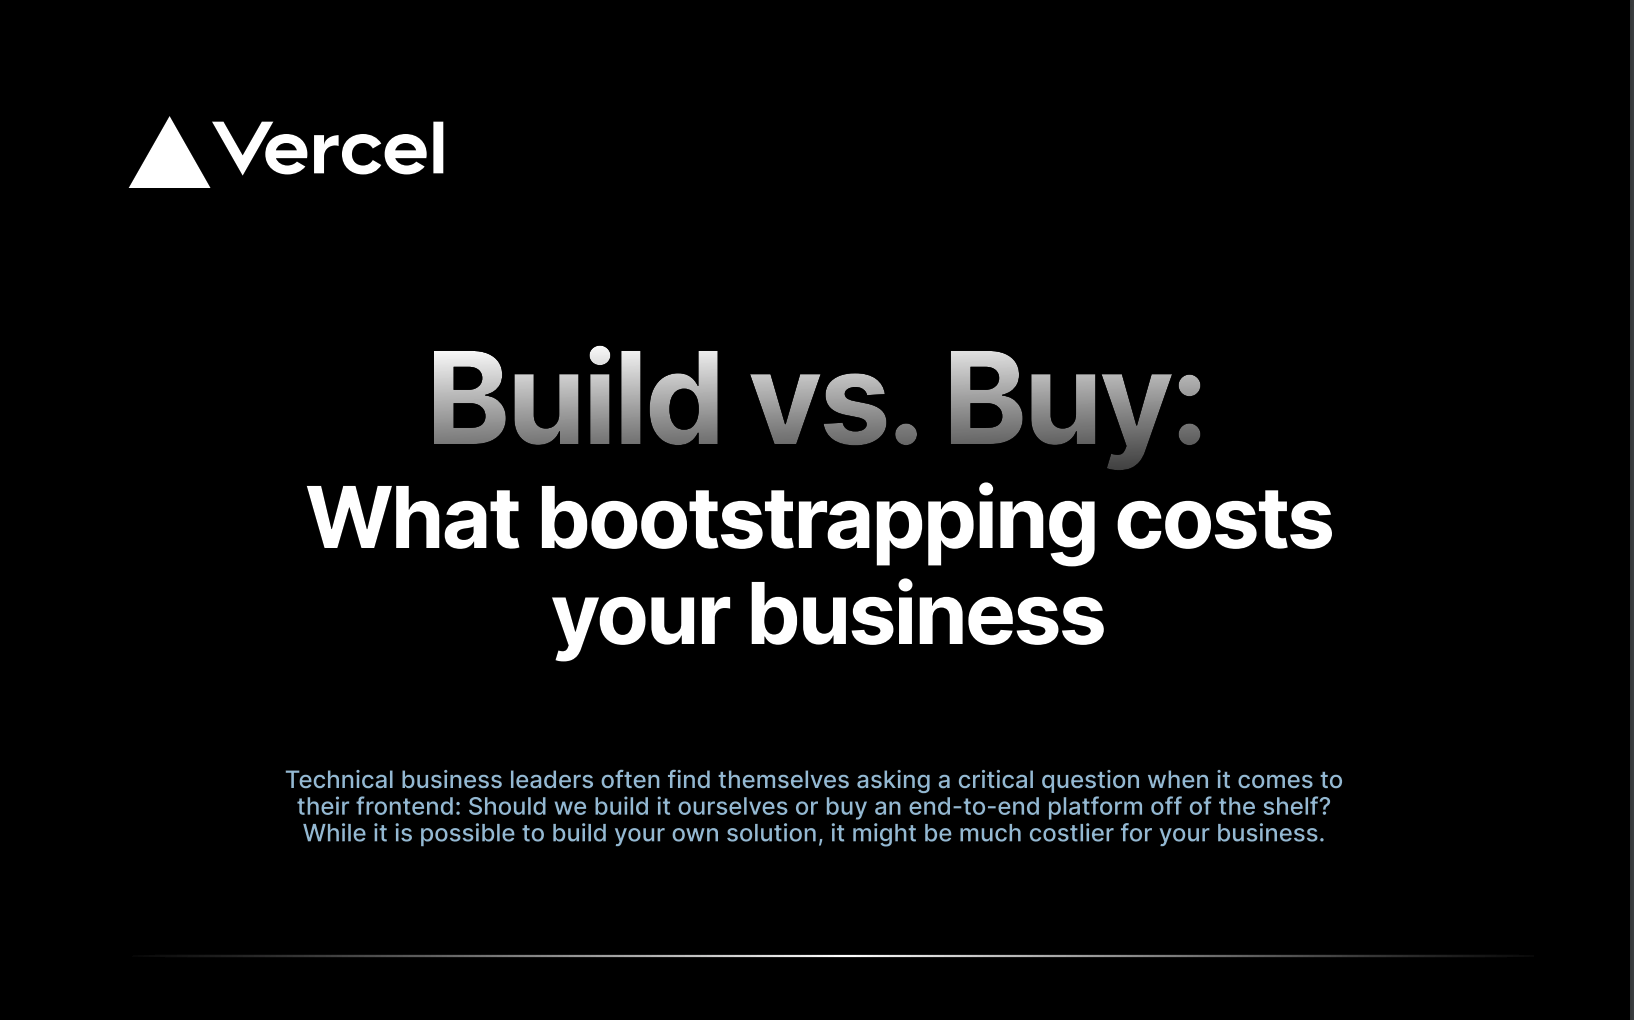 Build vs. Buy: What bootstrapping costs your business